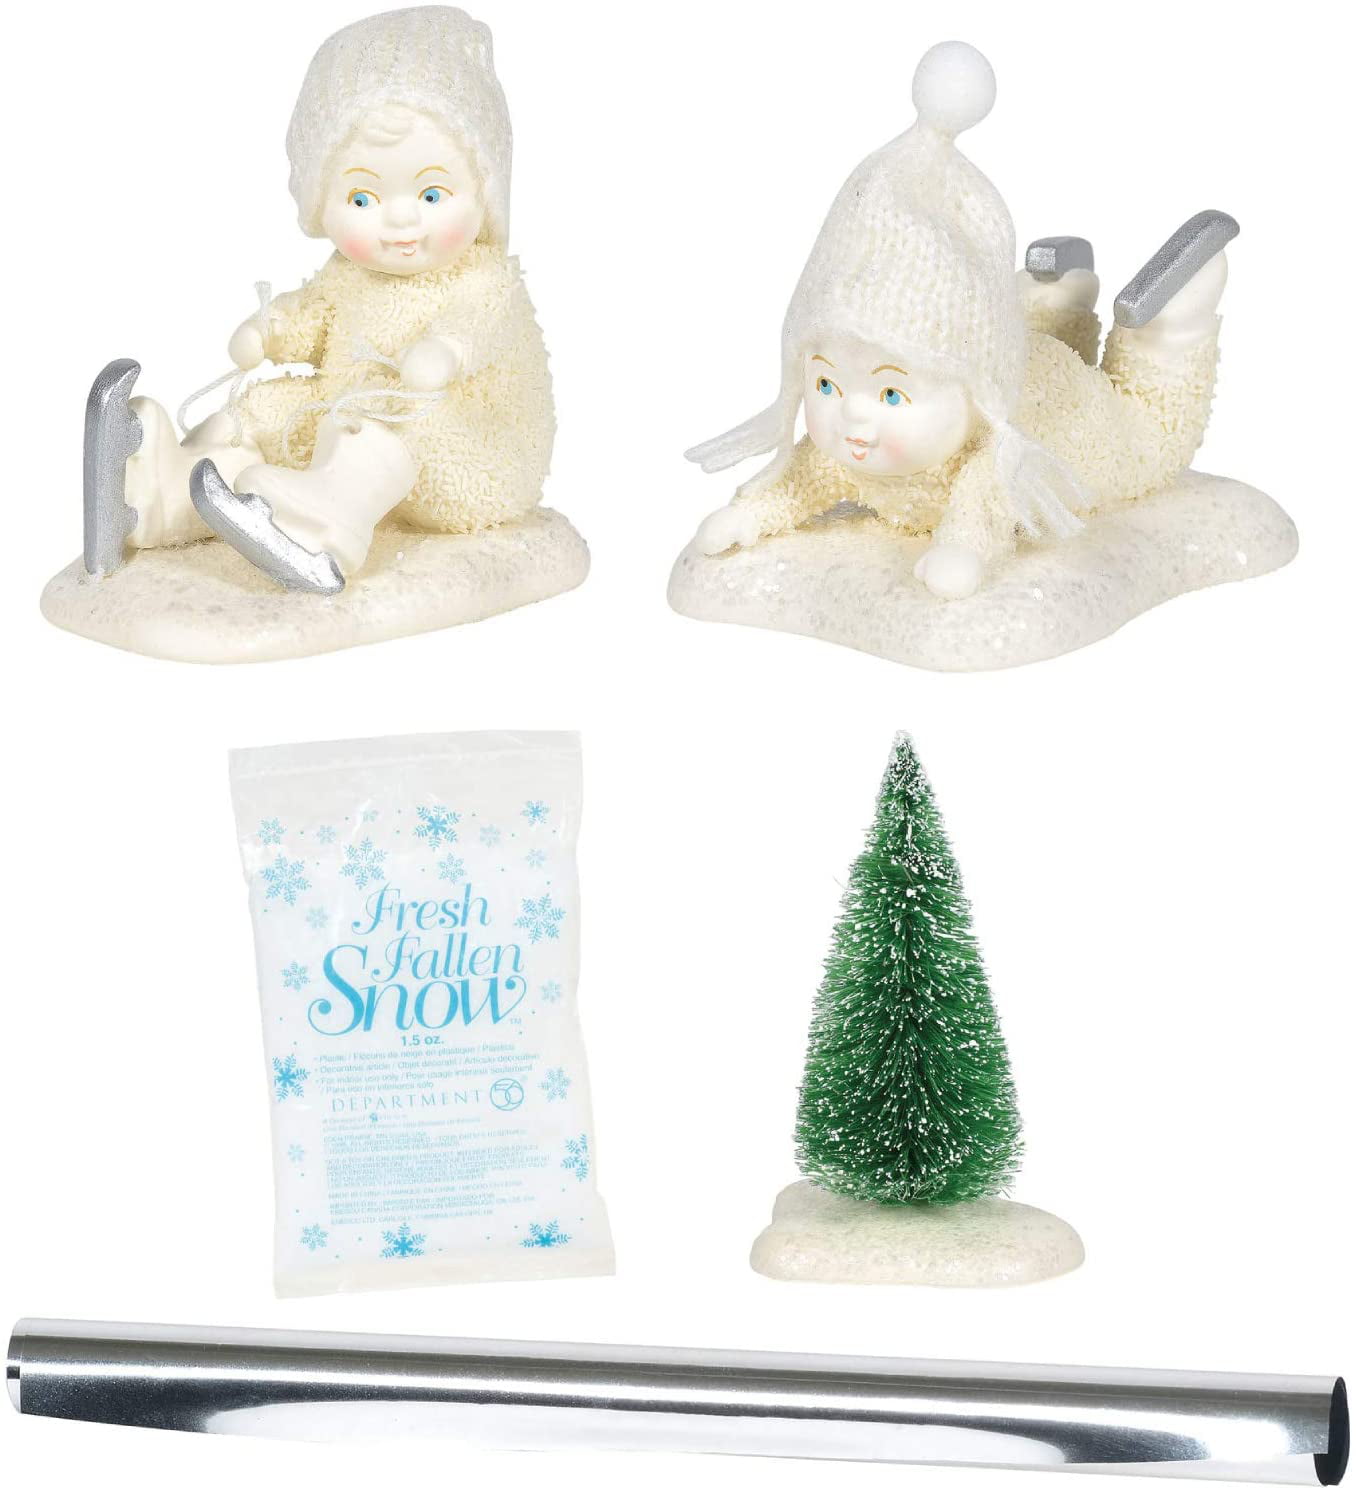 Set of 2 4 inch Department 56 Snowbabies Classics Baby Blossoms Figurine